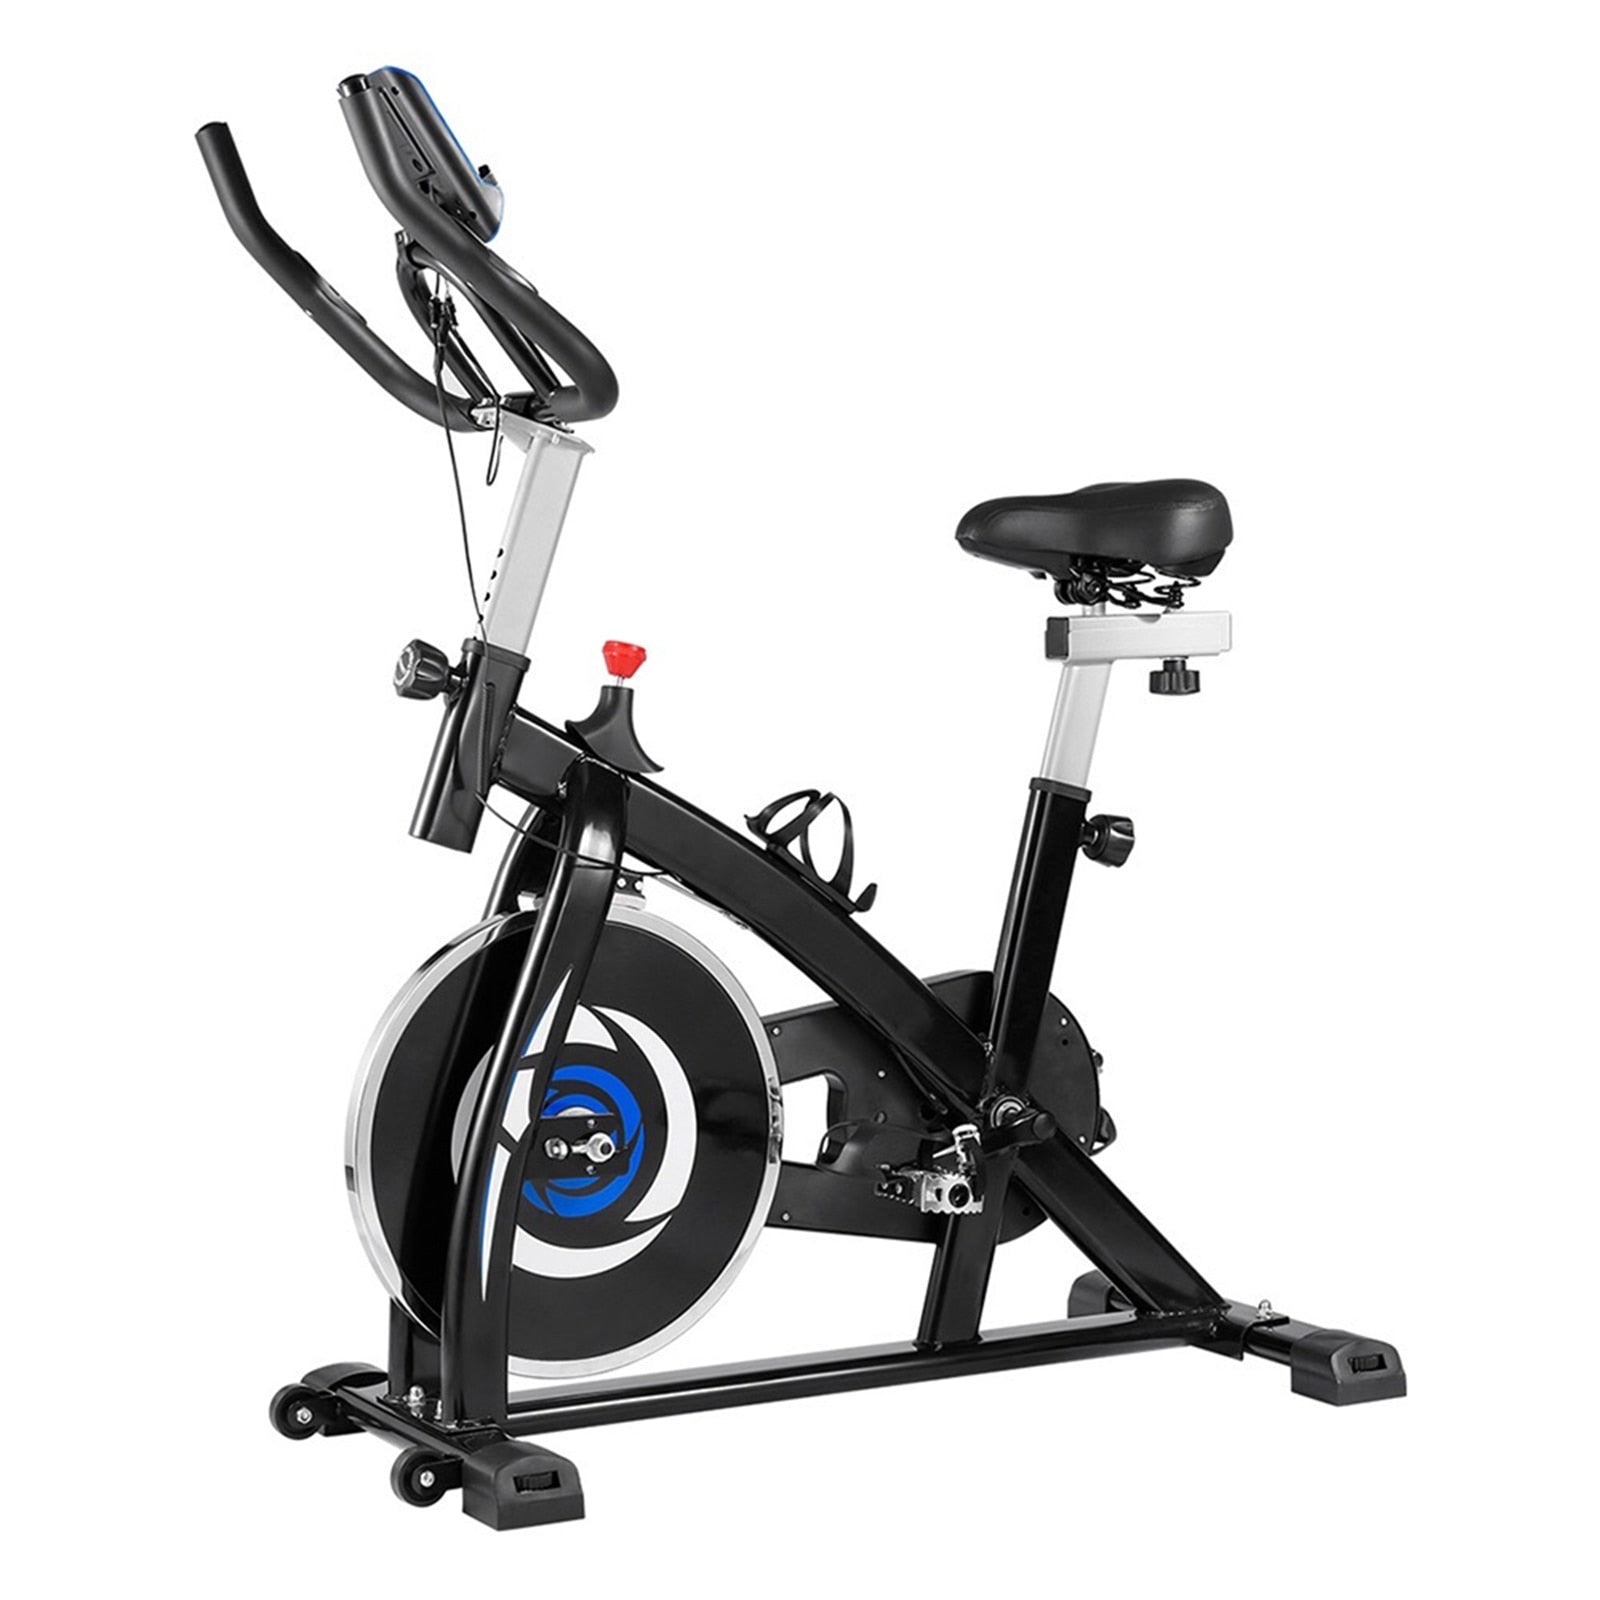 Spinning Indoor Training Spinning Exercise Bikes for Home Fitness 